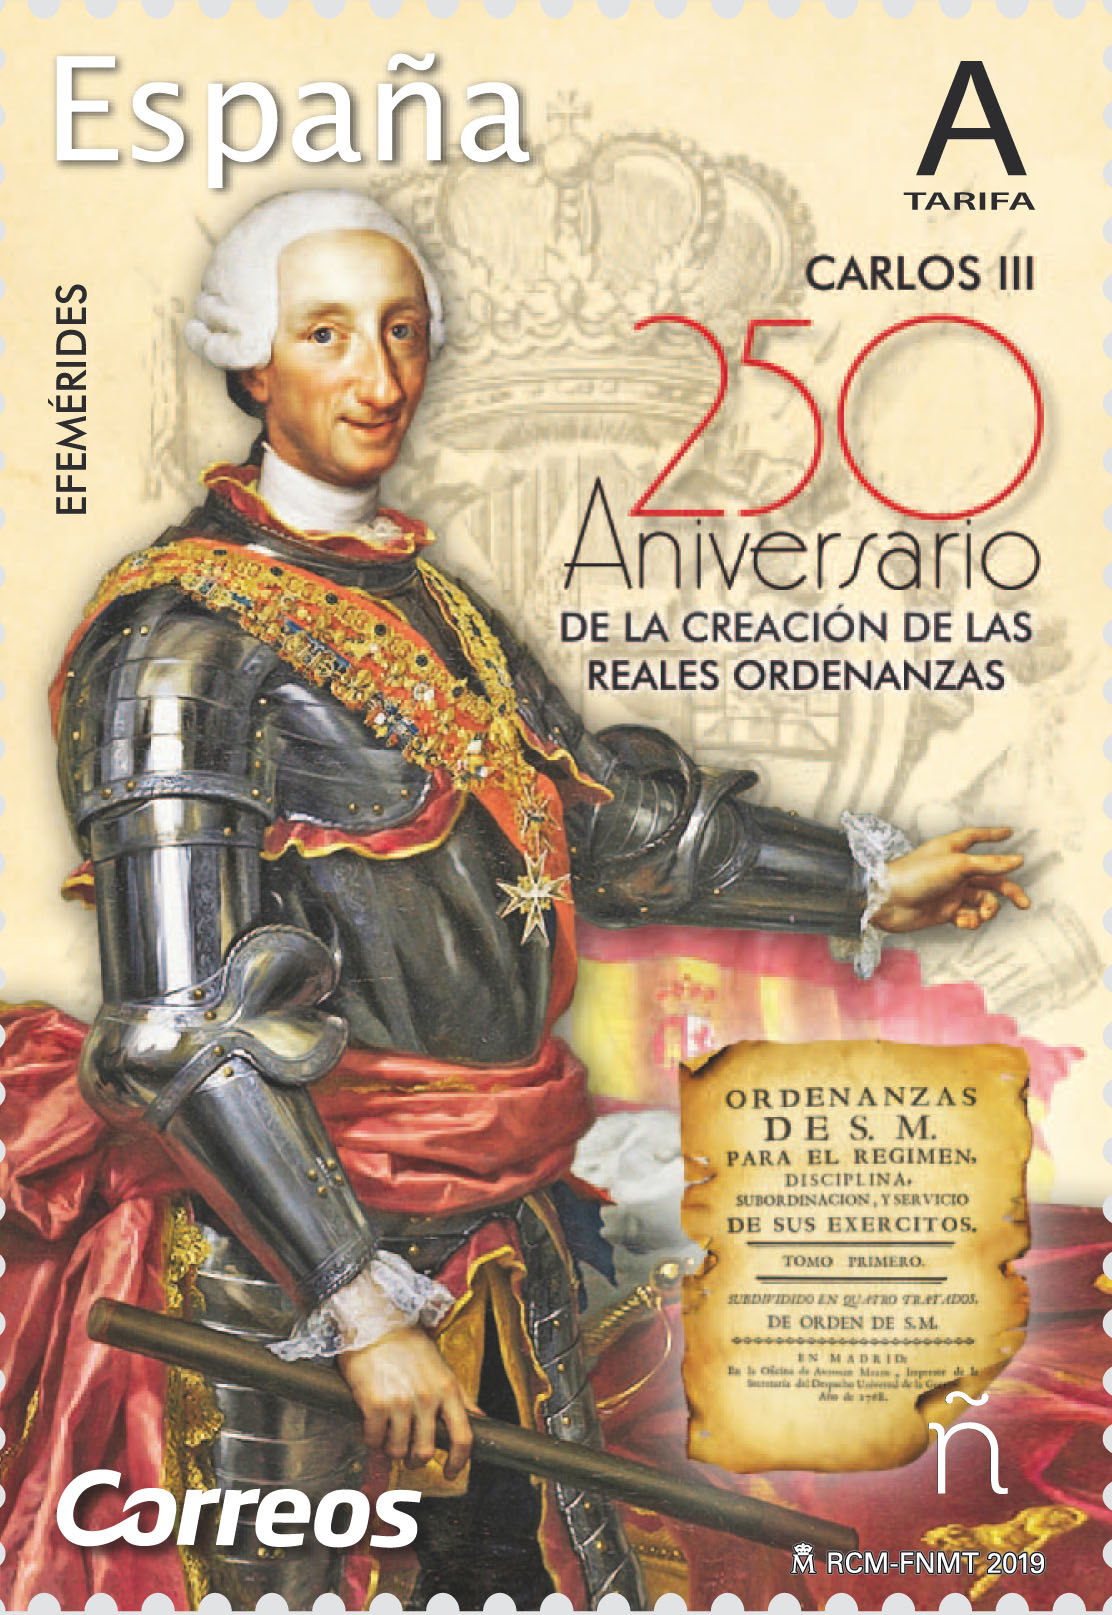 Spain - 250th Anniversary of the creation of the Royal Ordinances of Charles III (issued February 20, 2019)